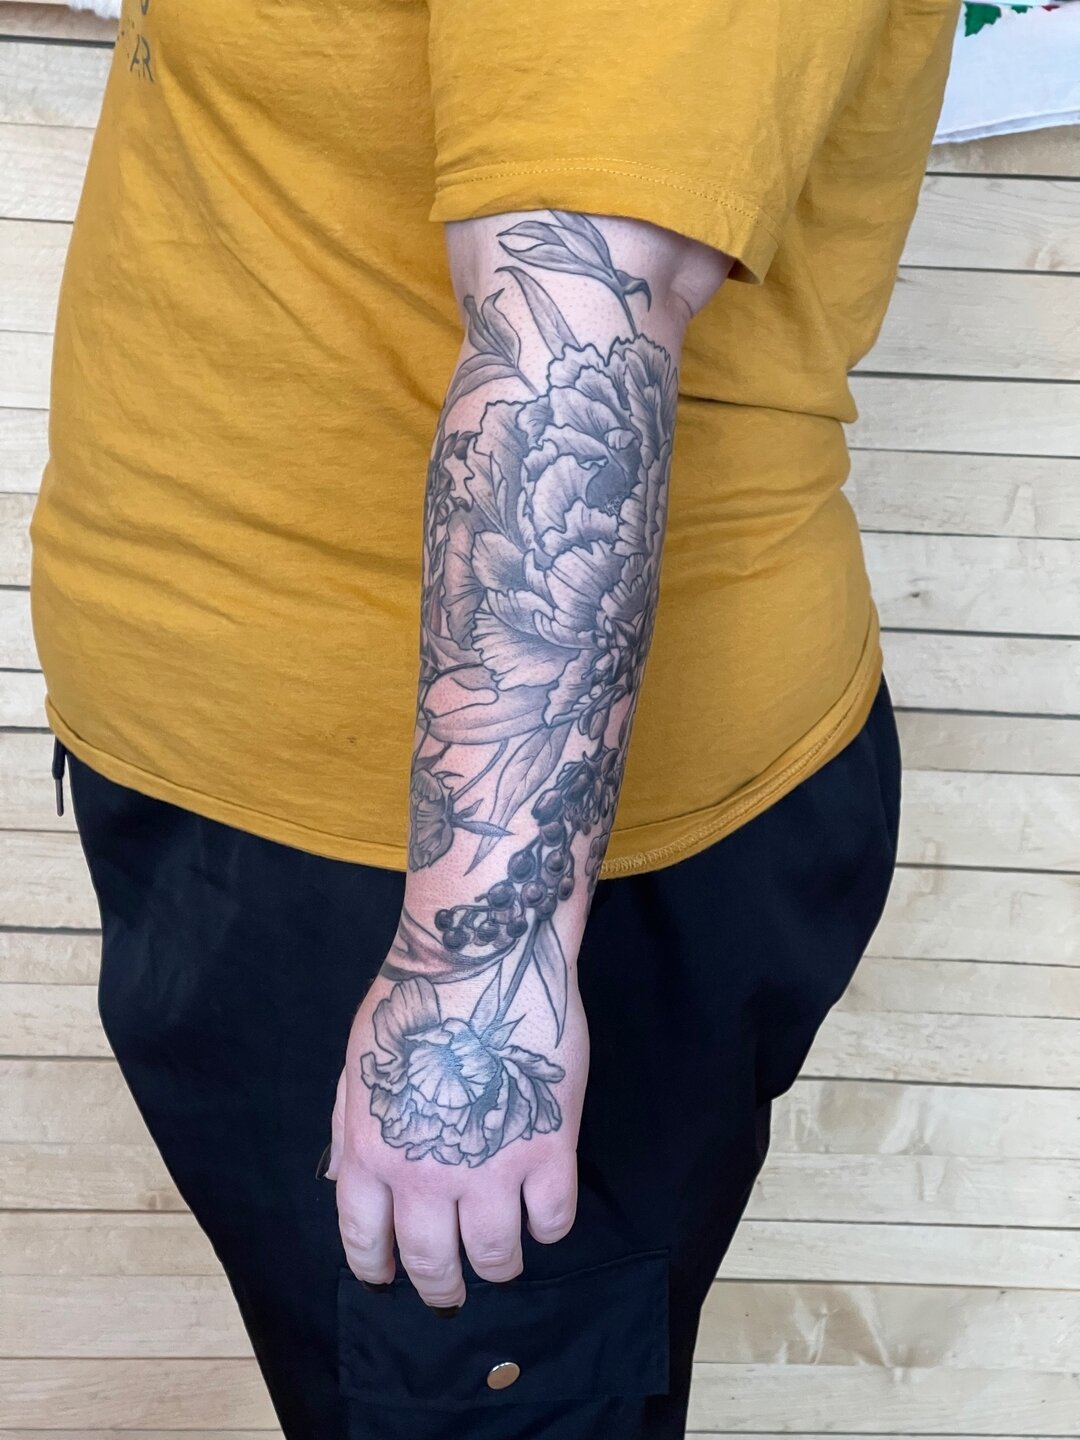 Finished lower half of a sleeve for a friend - peonies and nightshade